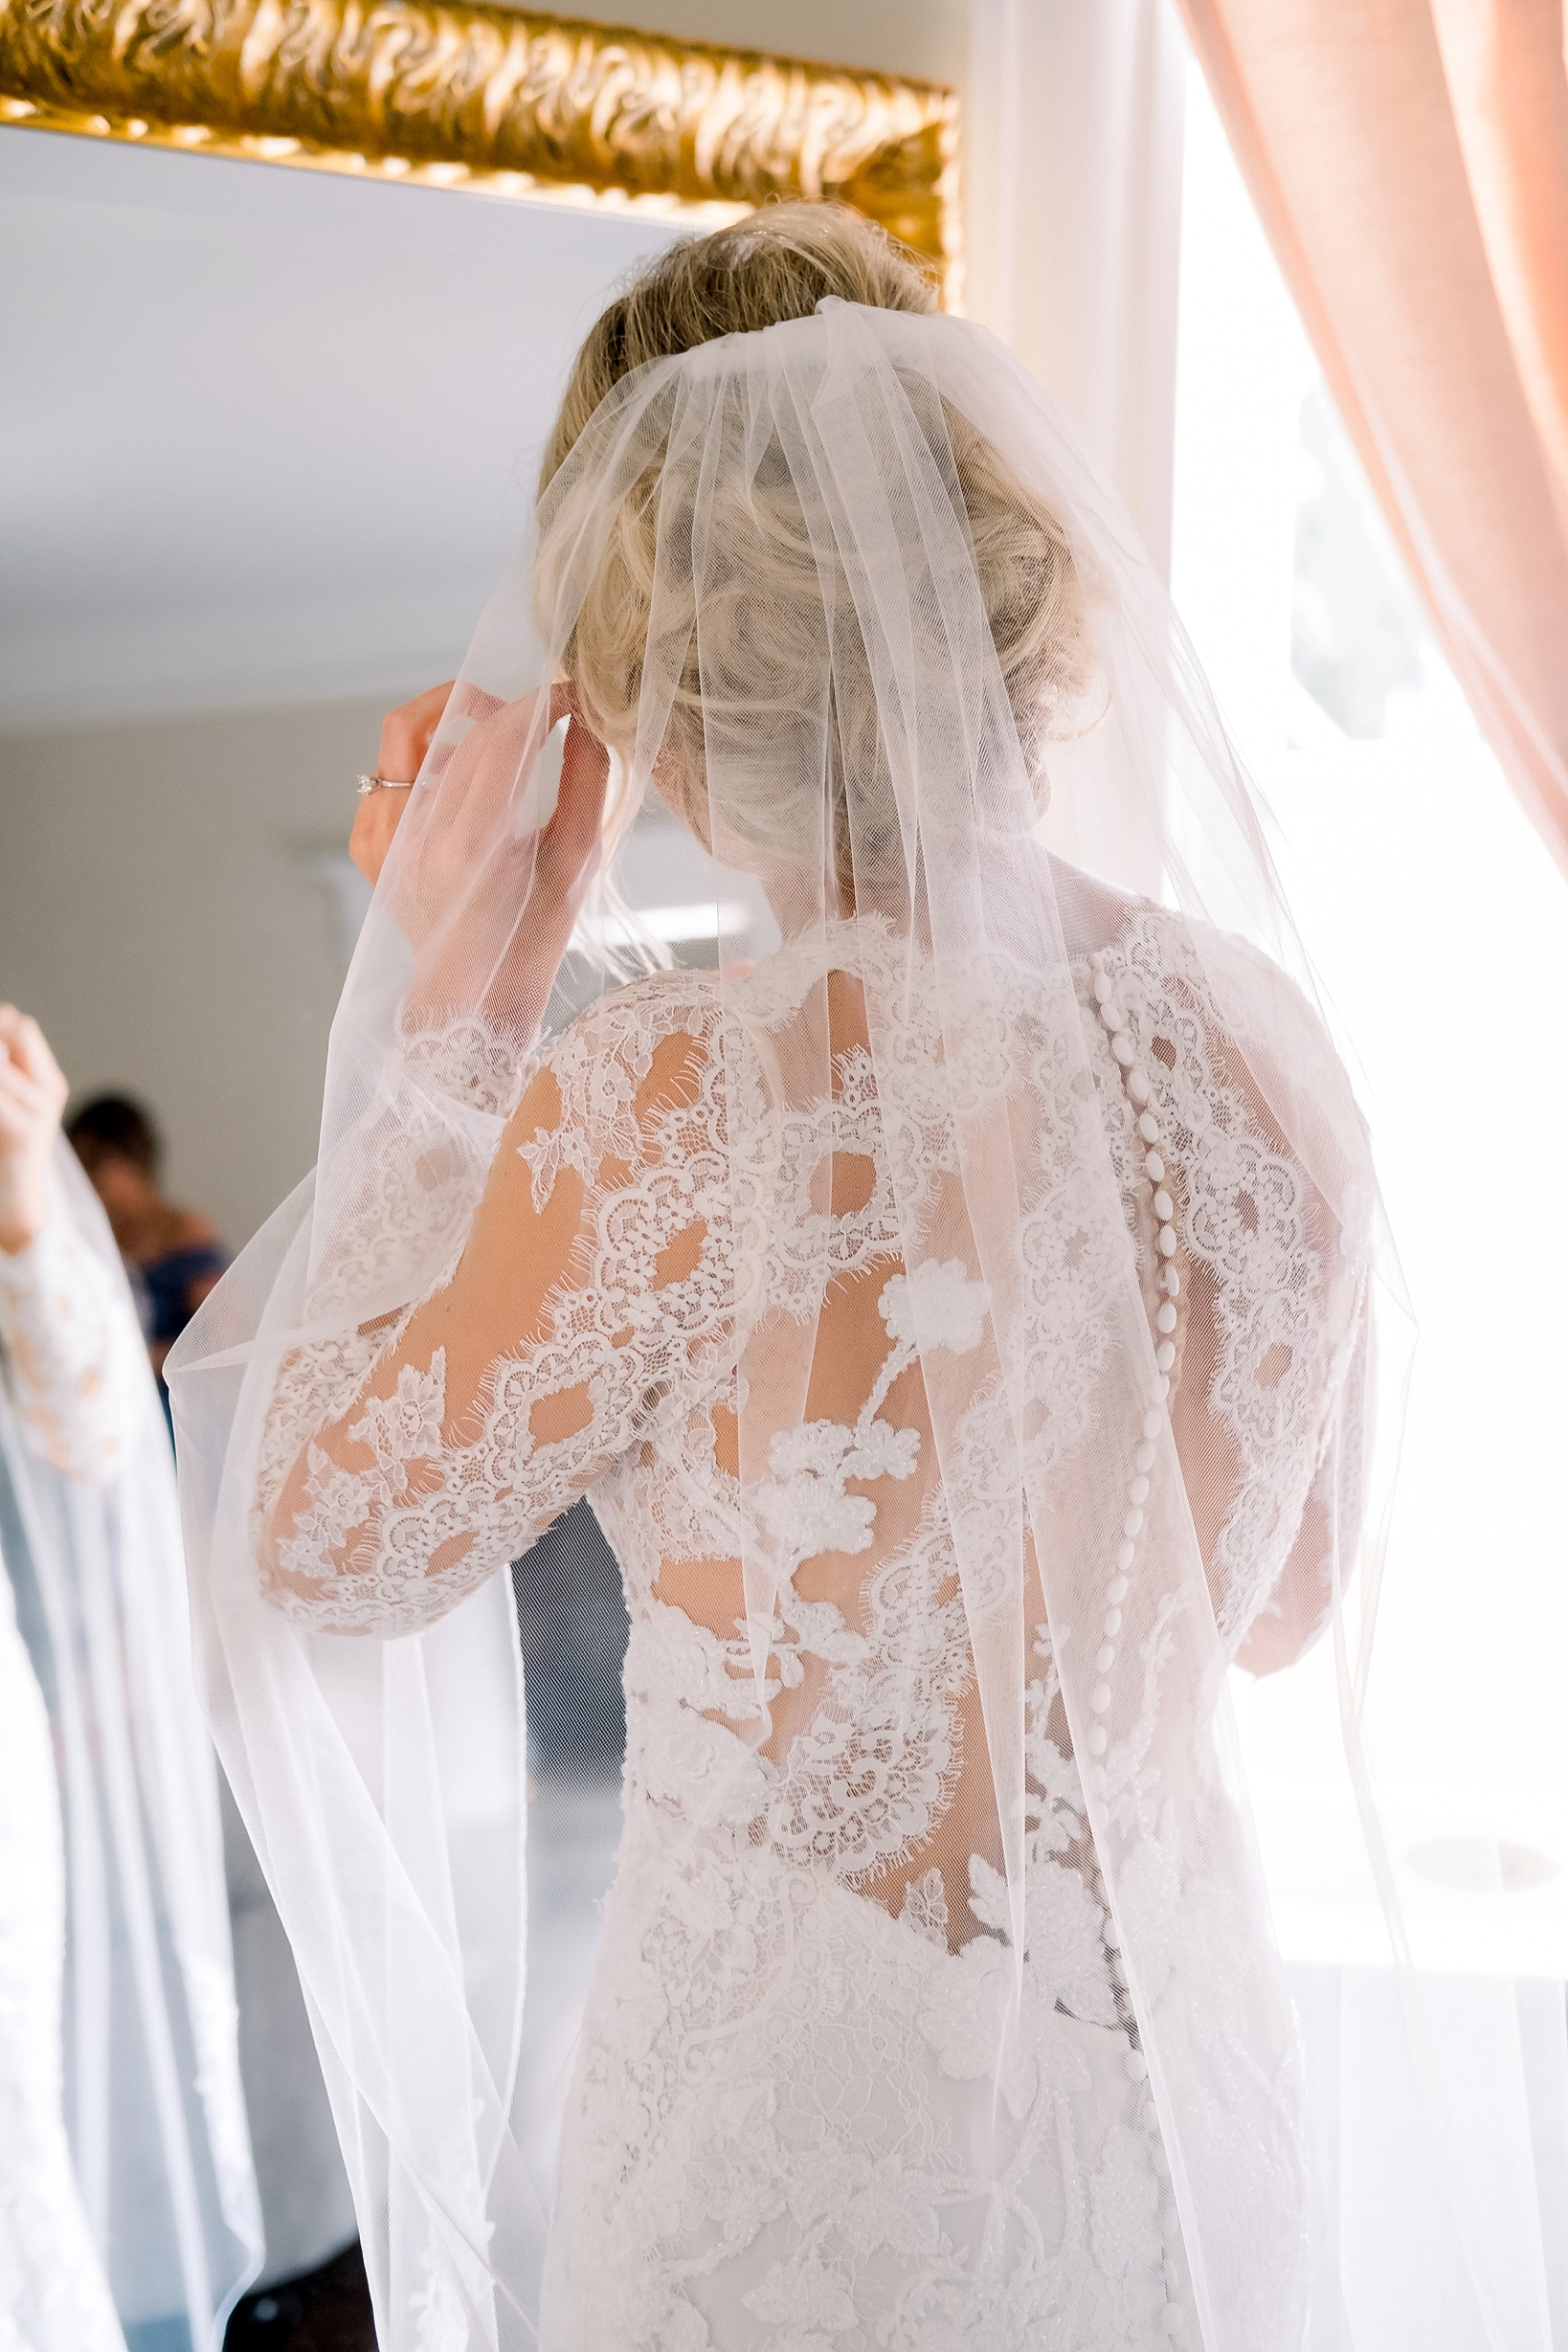 Back lace detail of the bride's dress by Sarah & Ben Photography